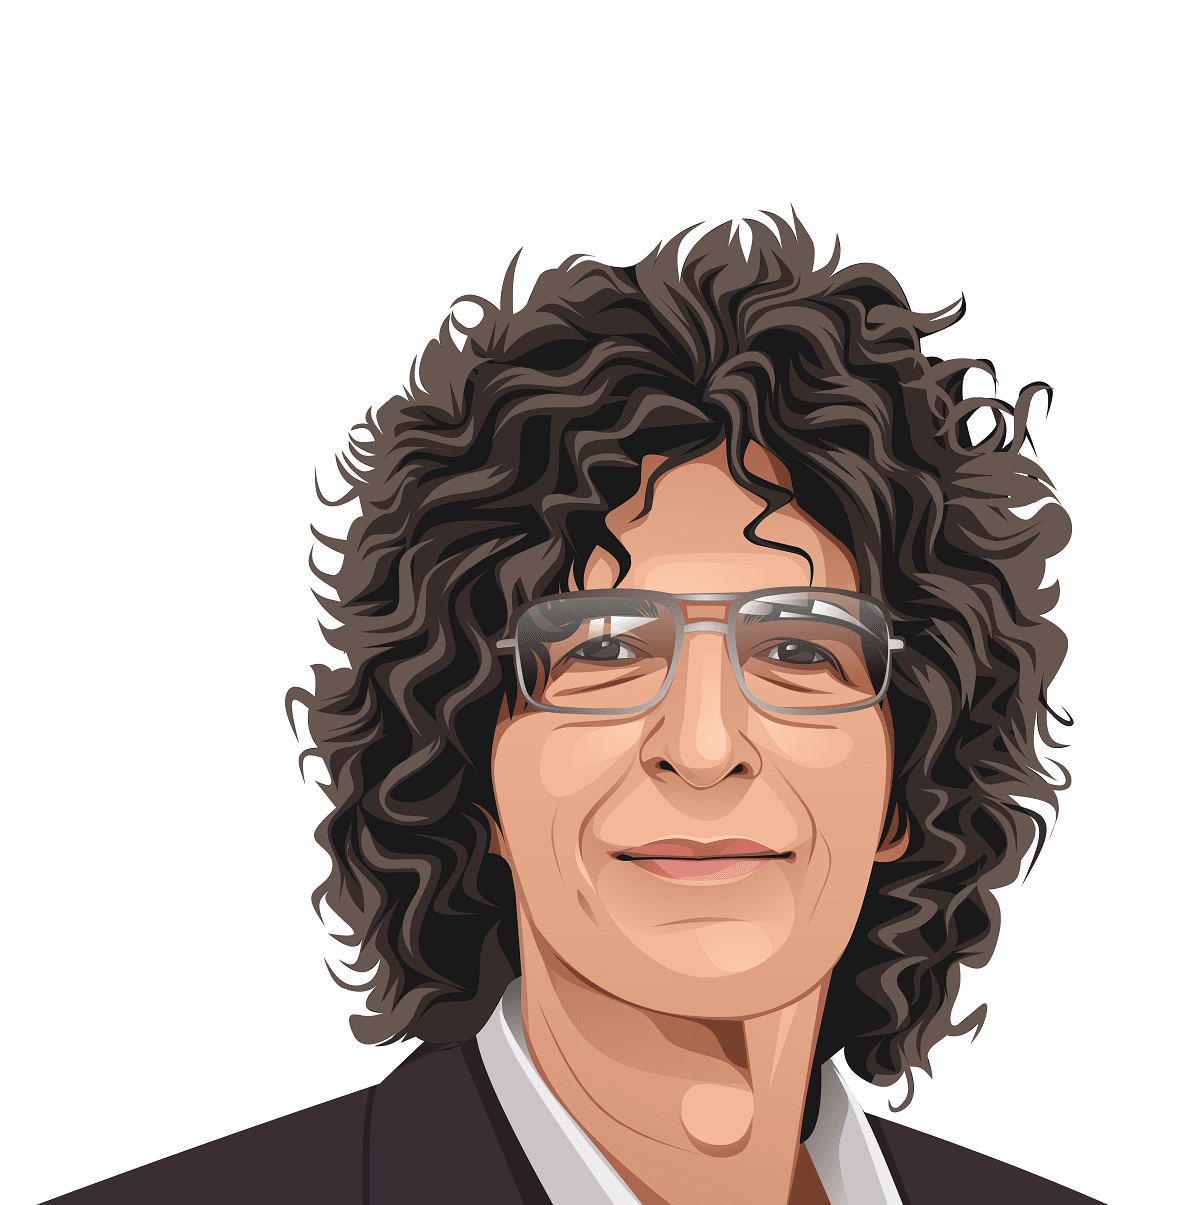 Howard Stern Vacation Schedule 2022 Howard Stern's Net Worth (Updated 2022) - Inspirationfeed